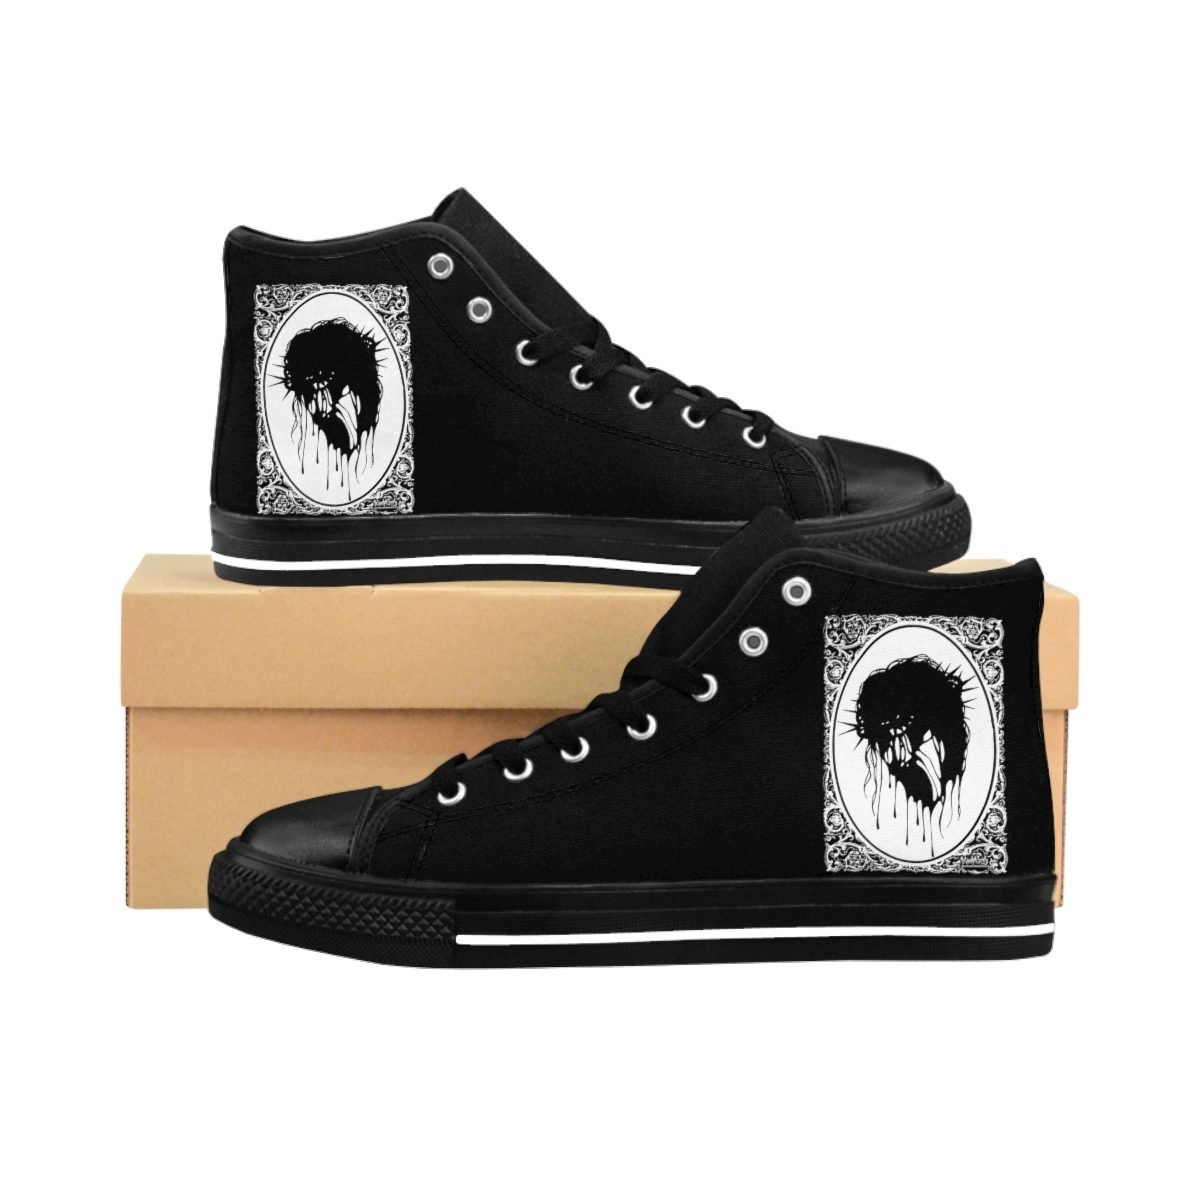 Christ Crucified Men’s High-top Sneakers